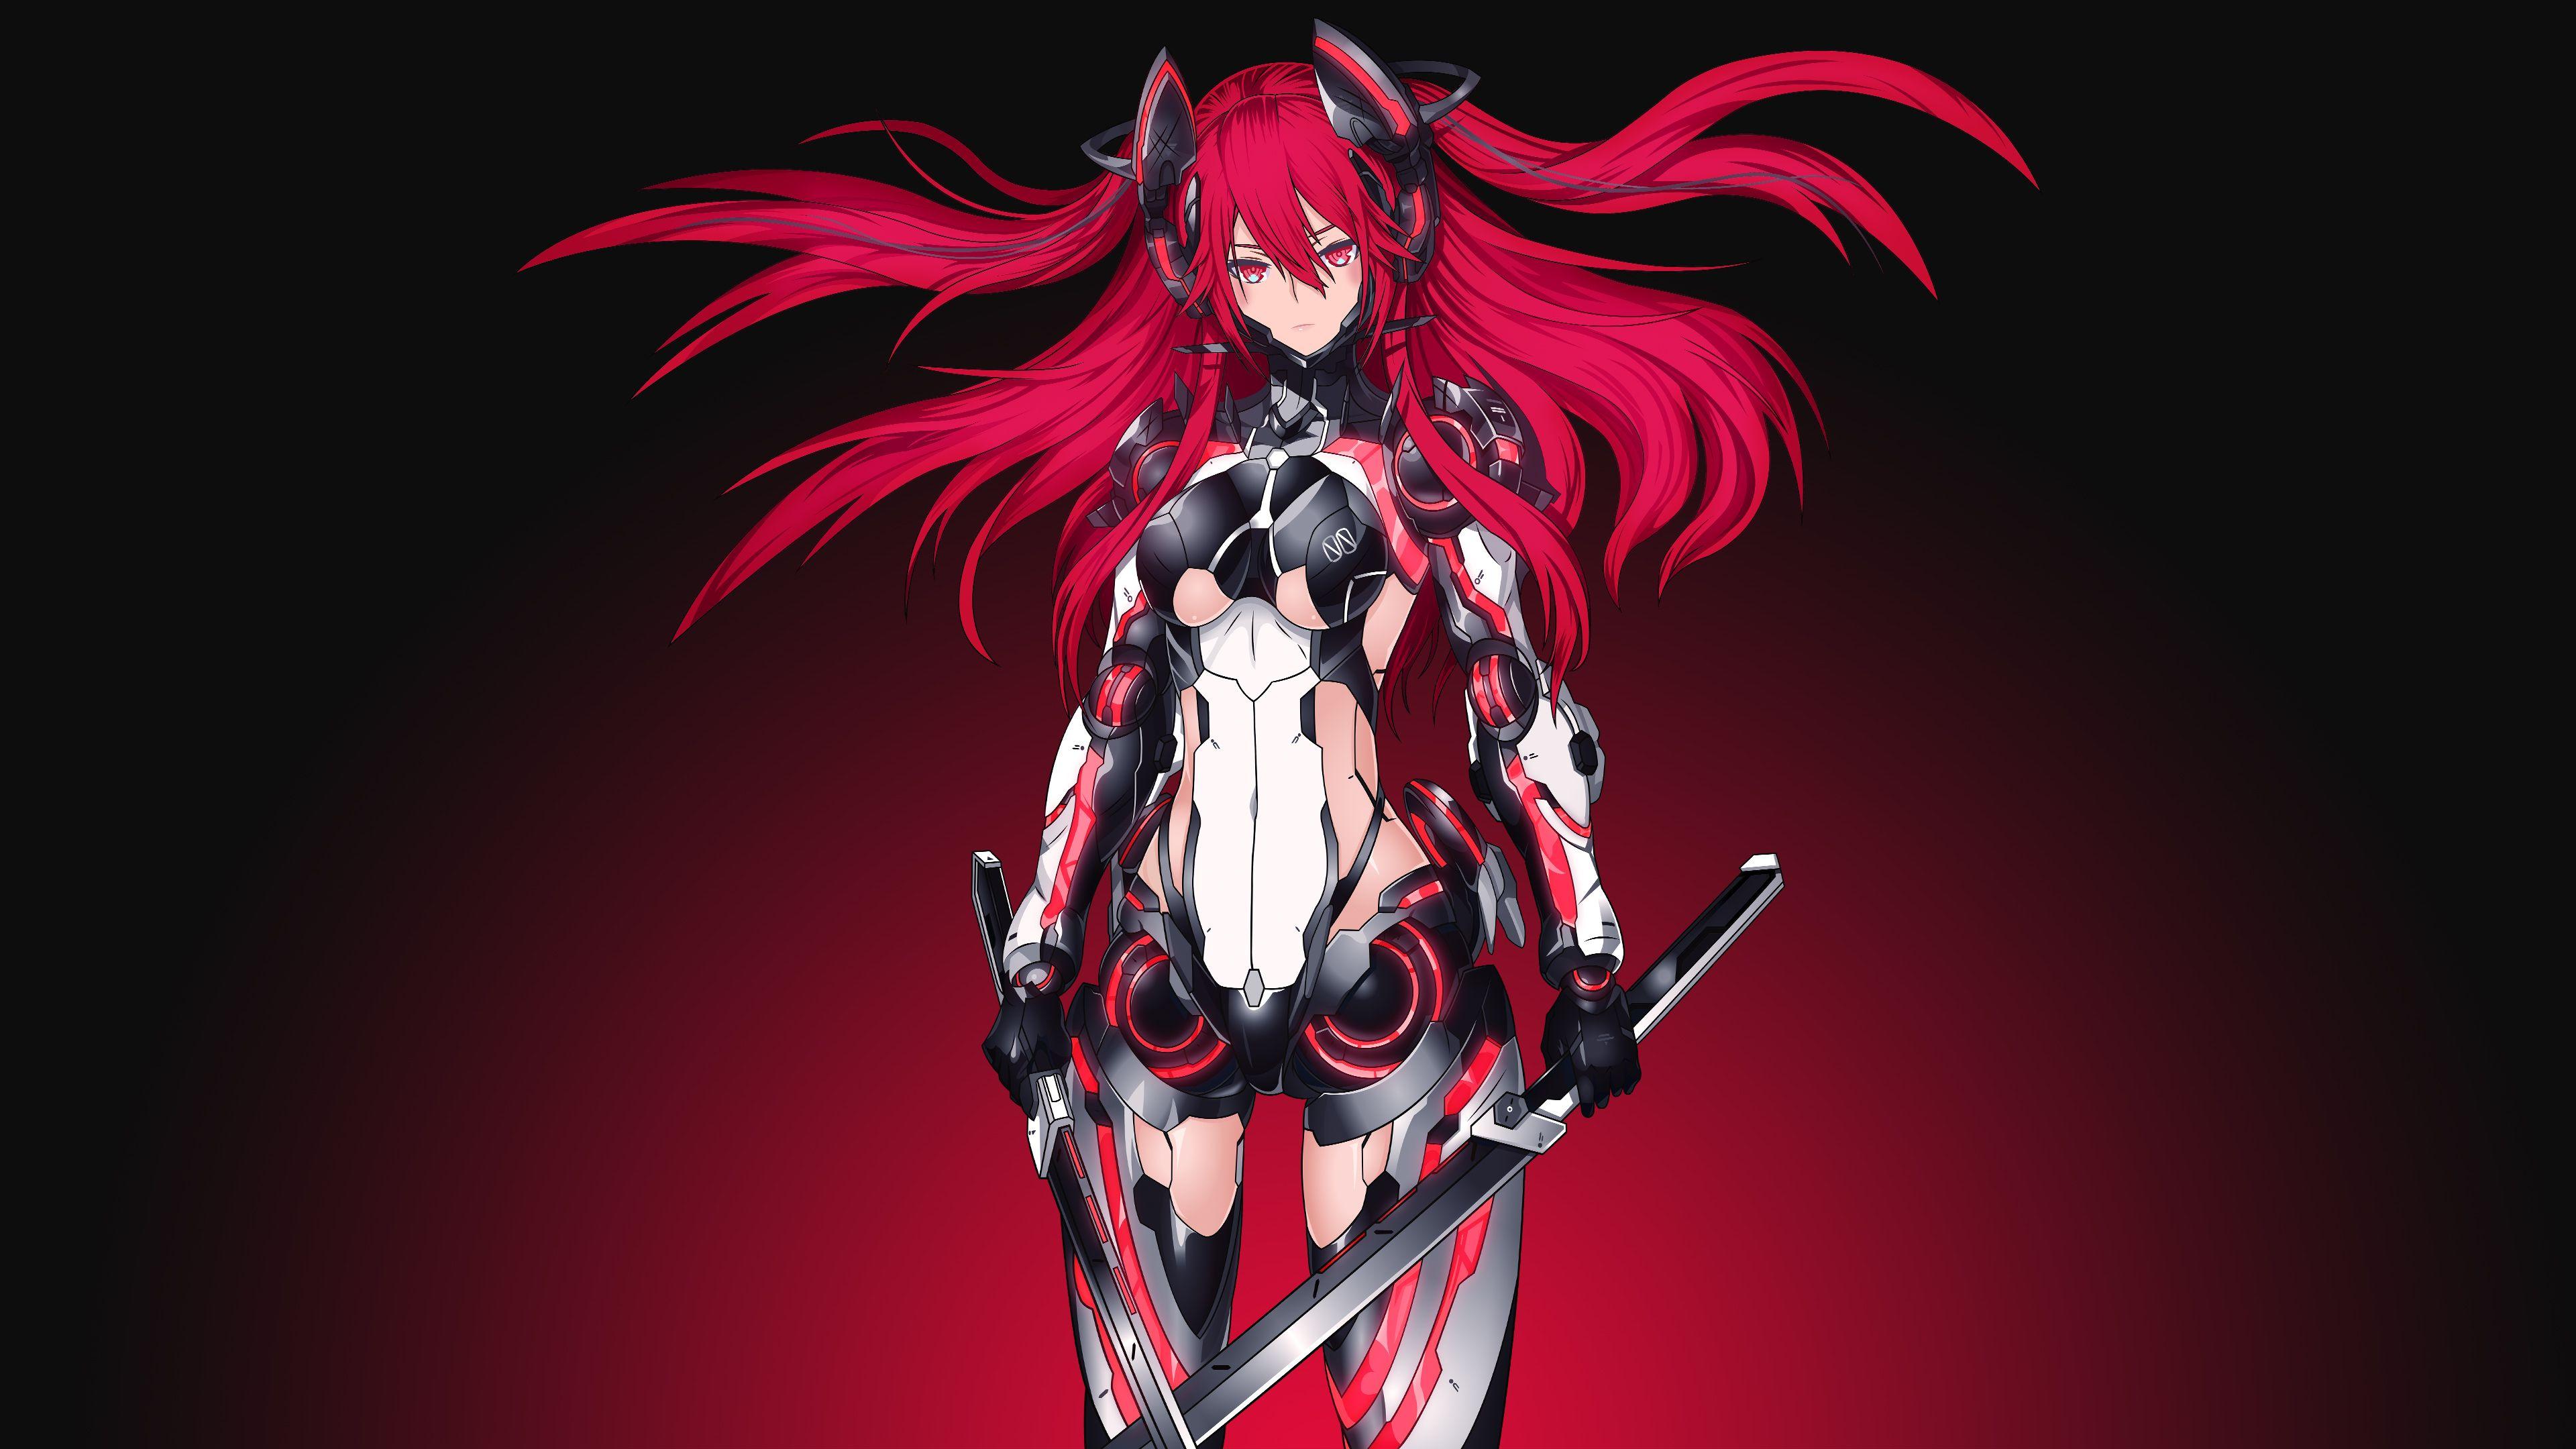 Amoled Red Anime Wallpapers Wallpaper Cave